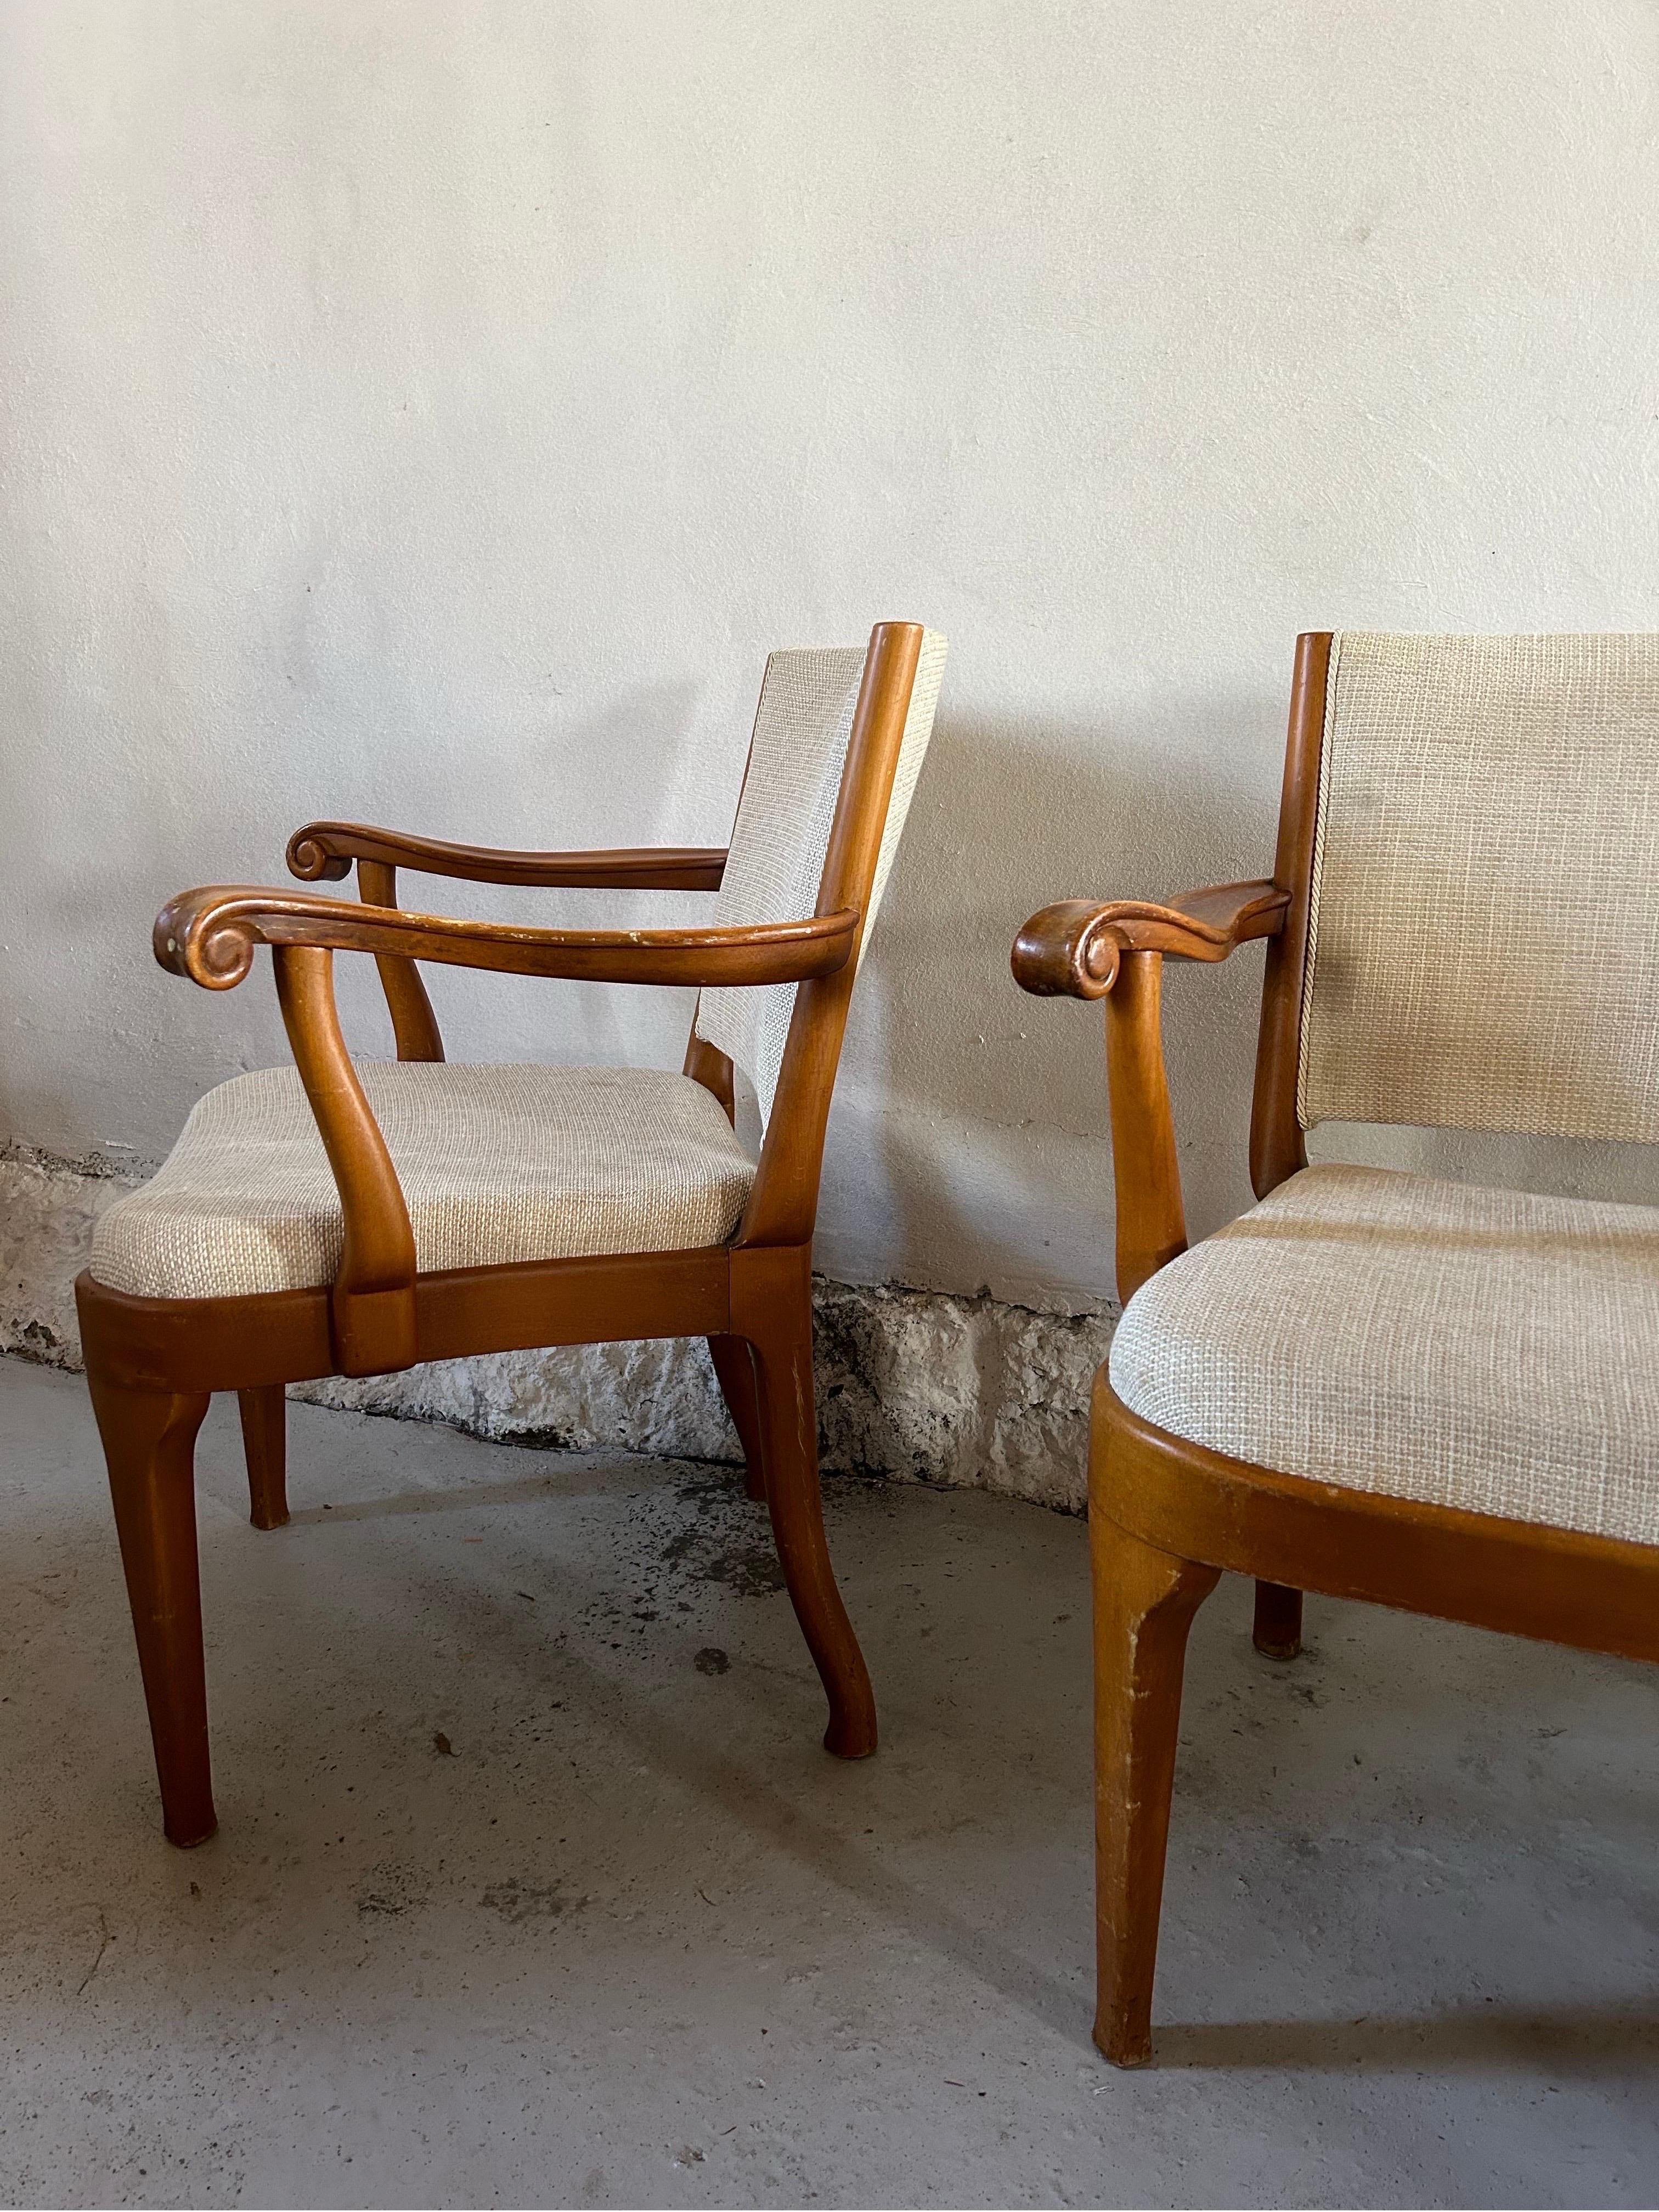 Wool Pair of Arts and Crafts Armchairs by Thorvald Jørgensen for Fritz Hansen 1910’s For Sale